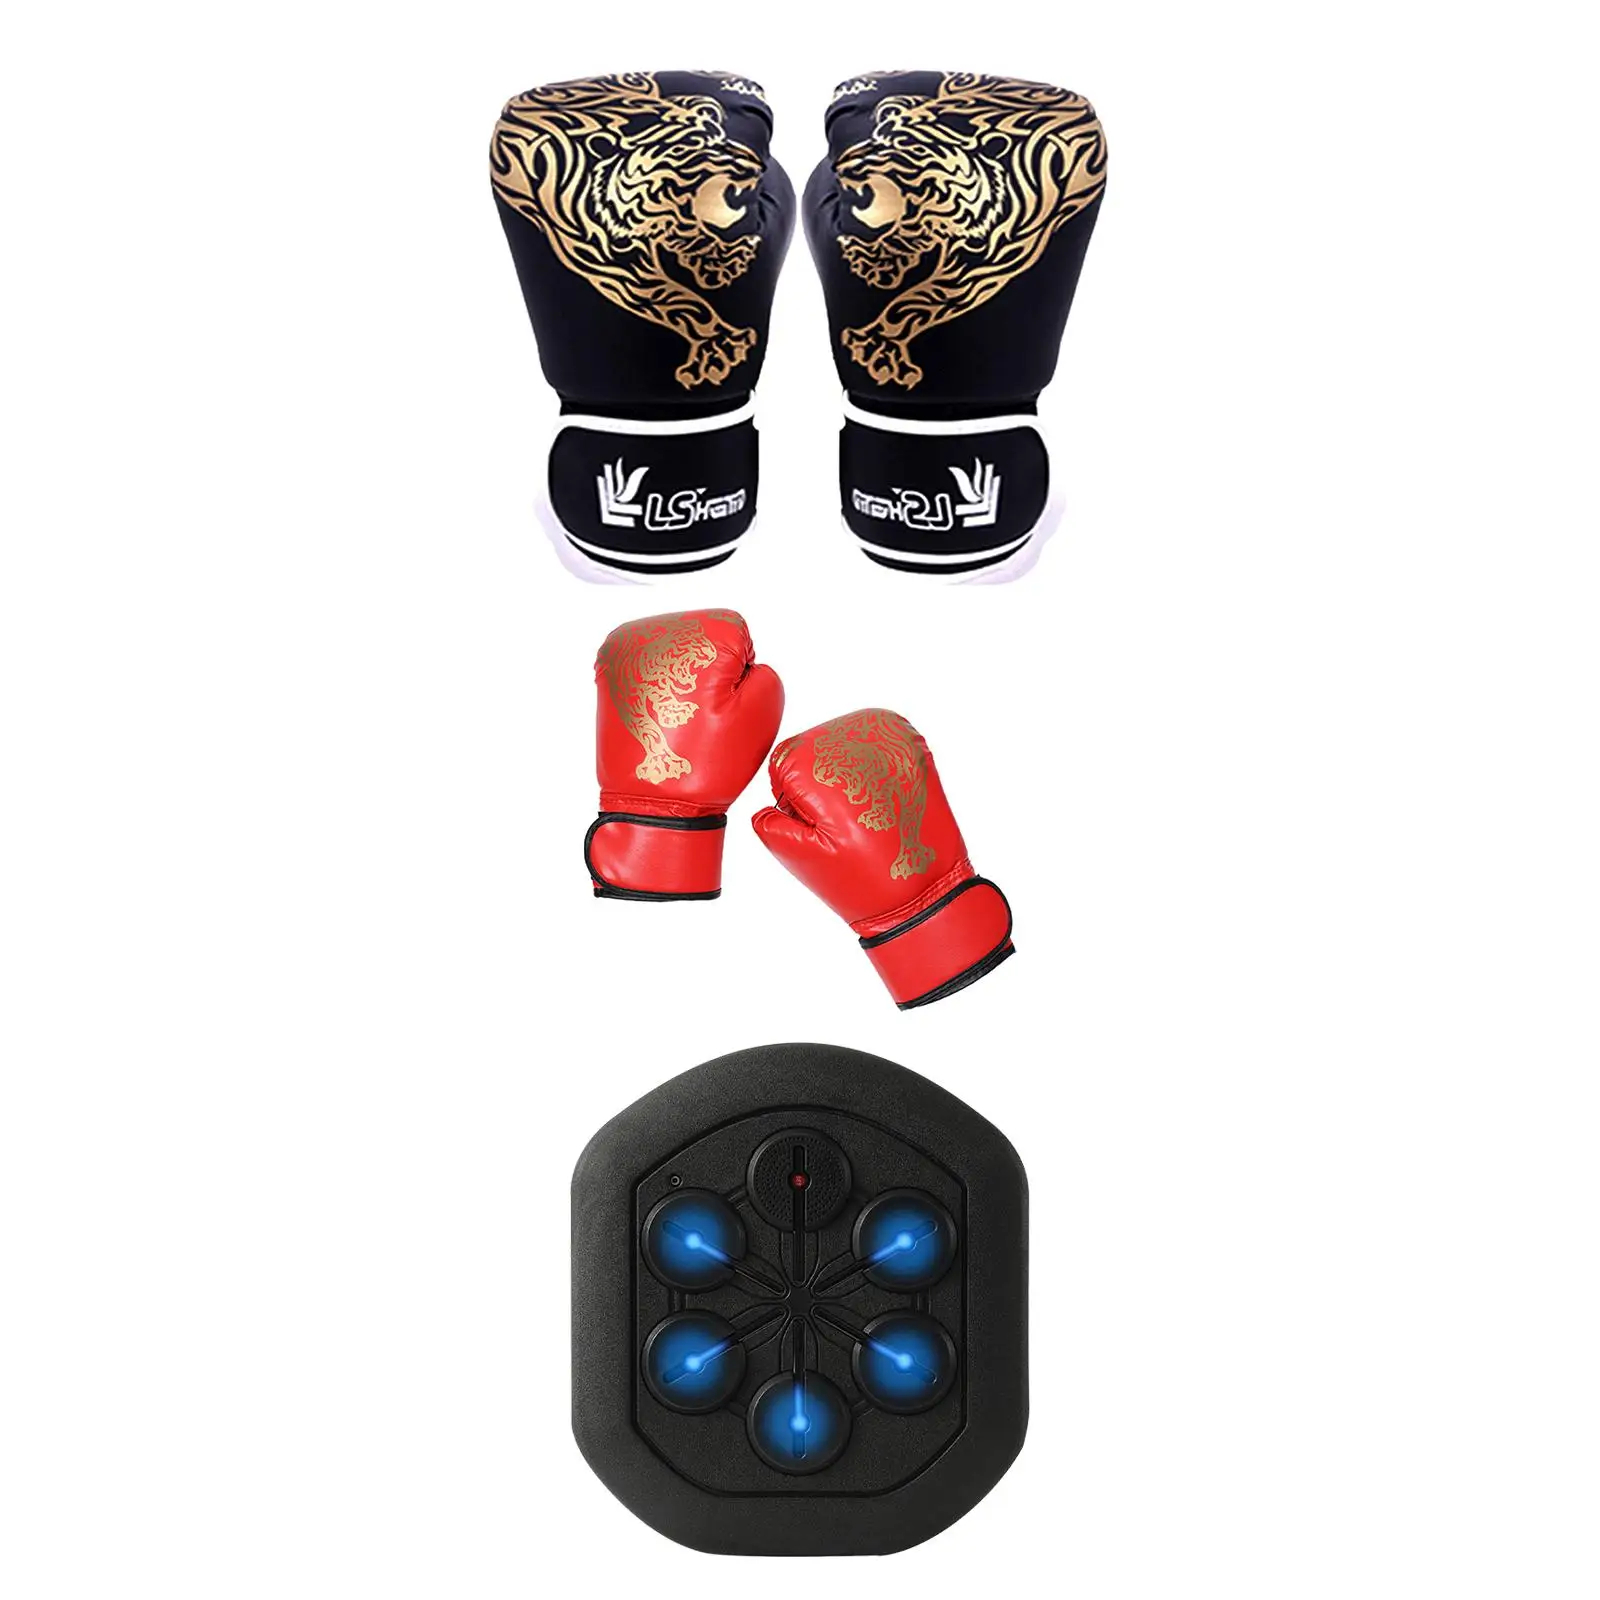 Music Boxing Wall Target Reaction Target Machine Wall Mounted Boxing Practice Training Equipment